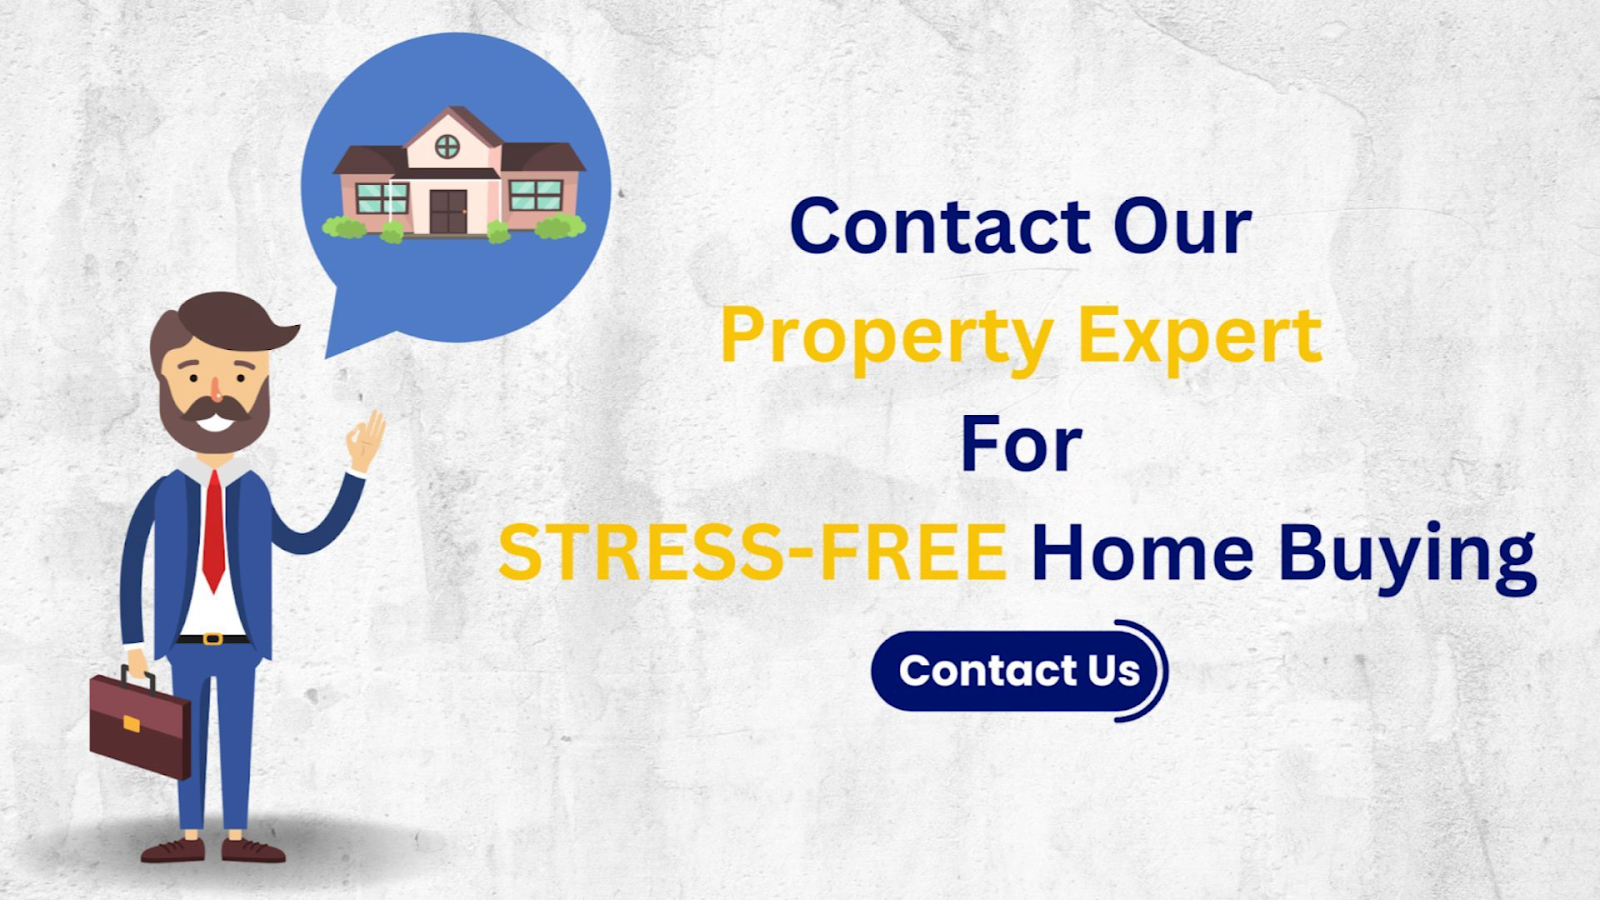 Contact PropertyCloud, you will find the property buying stress-free.